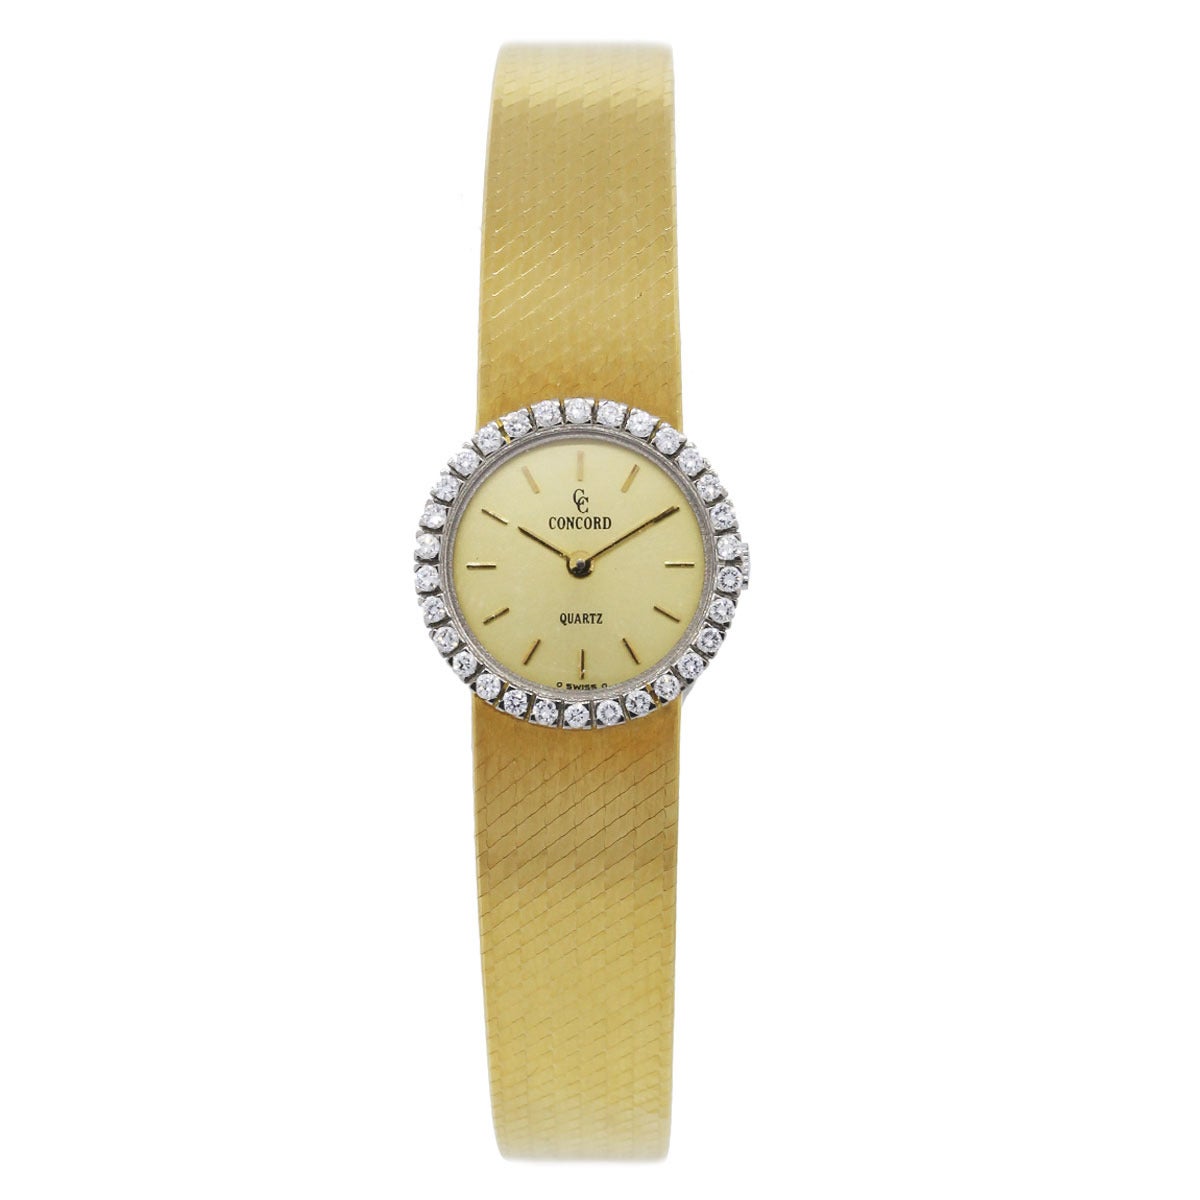 Brand: Concord
Case Material: 18k Yellow Gold
Movement: Quartz
Case Measurement: 20mm
Dial: Gold dial with gold sticks 
Crystal: Plastic
Clasp: Jewelers Clasp
Size: Will Fit a 5.5